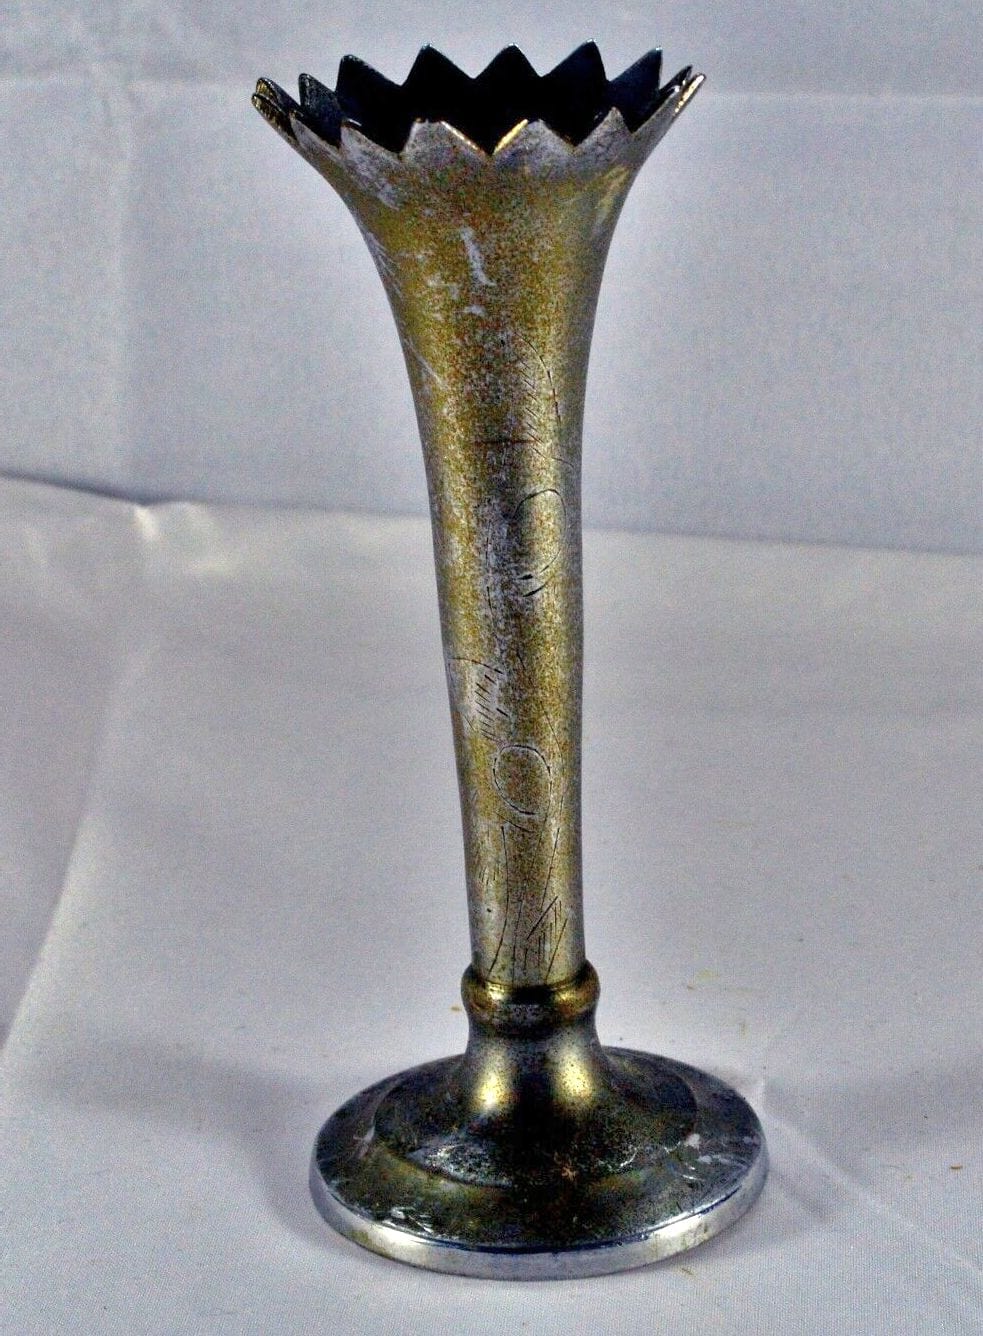 METAL BUD VASE ETCHED PATTERN(PREVIOUSLY OWNED) GOOD CONDITION TARNISHED - TMD167207